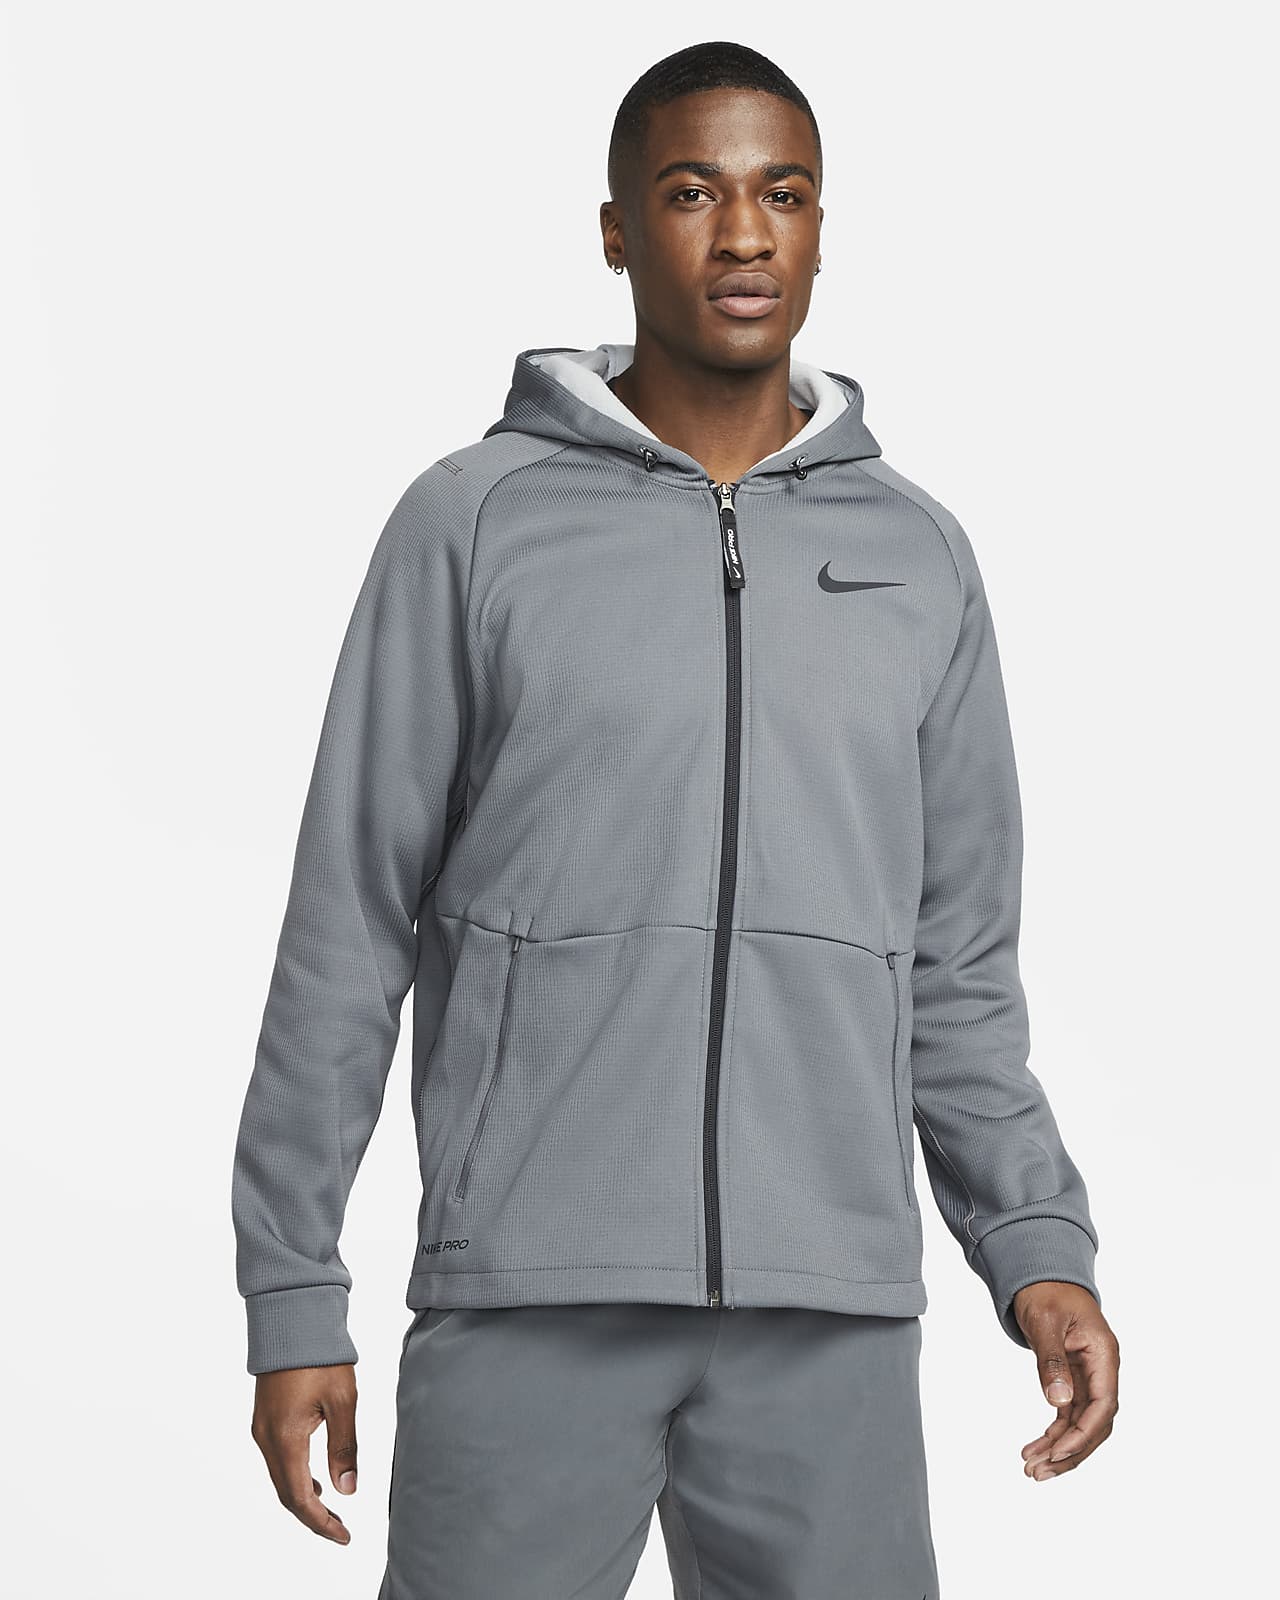 https://static.nike.com/a/images/t_PDP_1280_v1/f_auto,q_auto:eco/d8e642af-6a44-491d-9f43-0918748730ce/therma-sphere-mens-therma-fit-hooded-fitness-jacket-R2pmrq.png